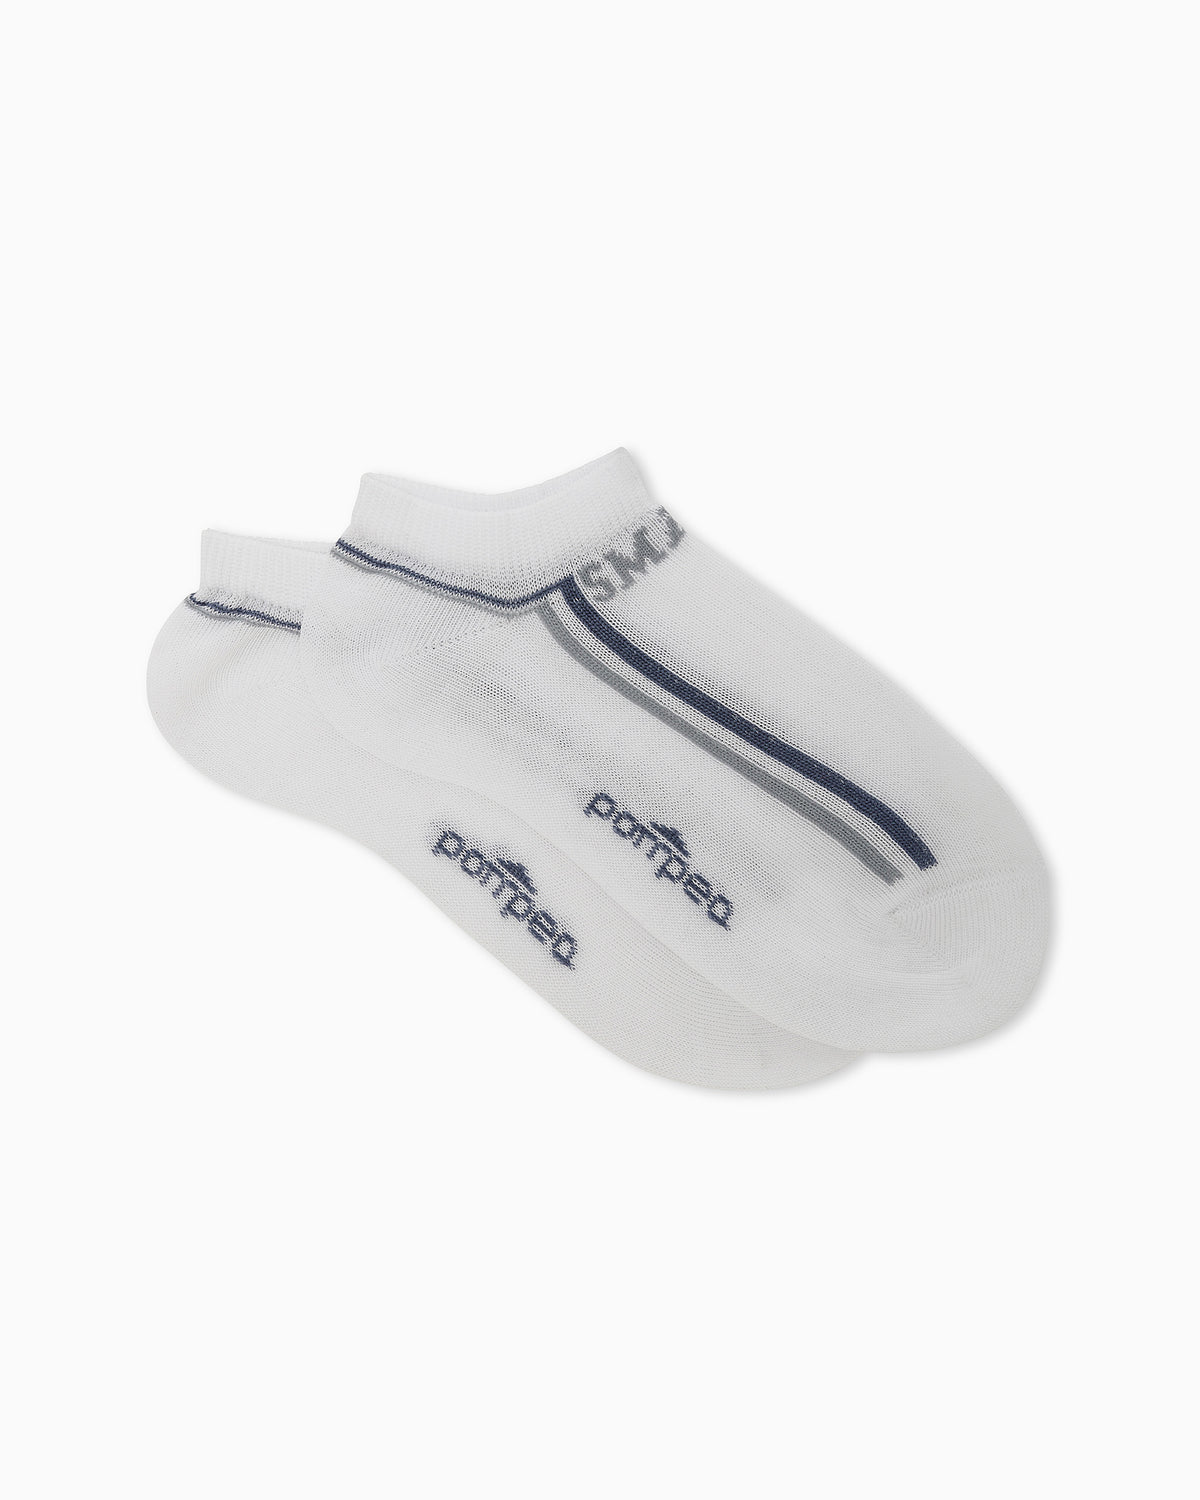 BOYS' ALLOCCO TRAINER LINERS